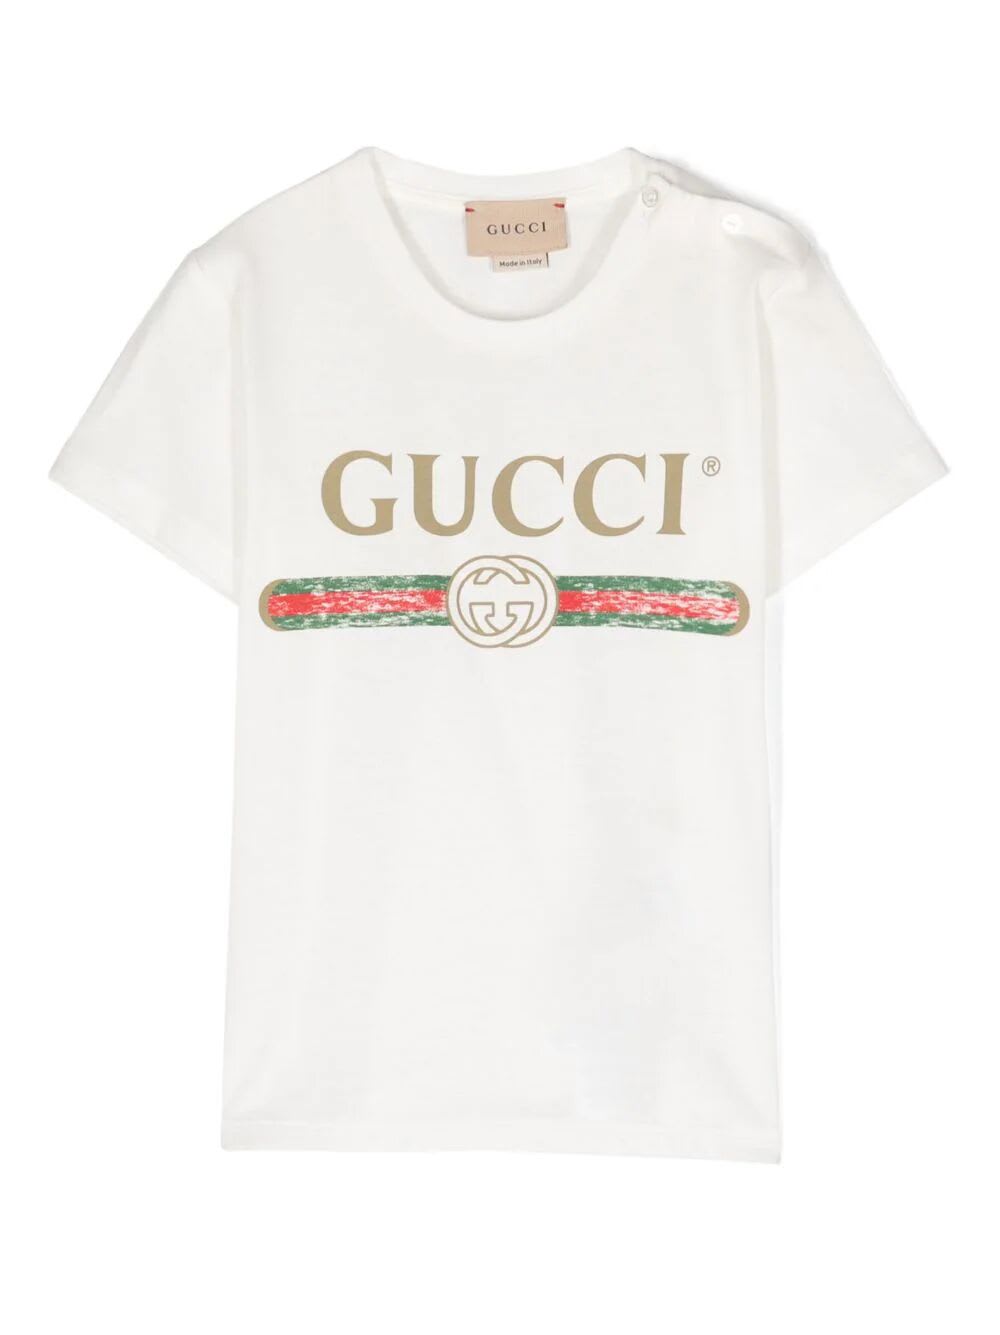 Gucci Babies' T-shirt Cotton Jersey In White Green Red